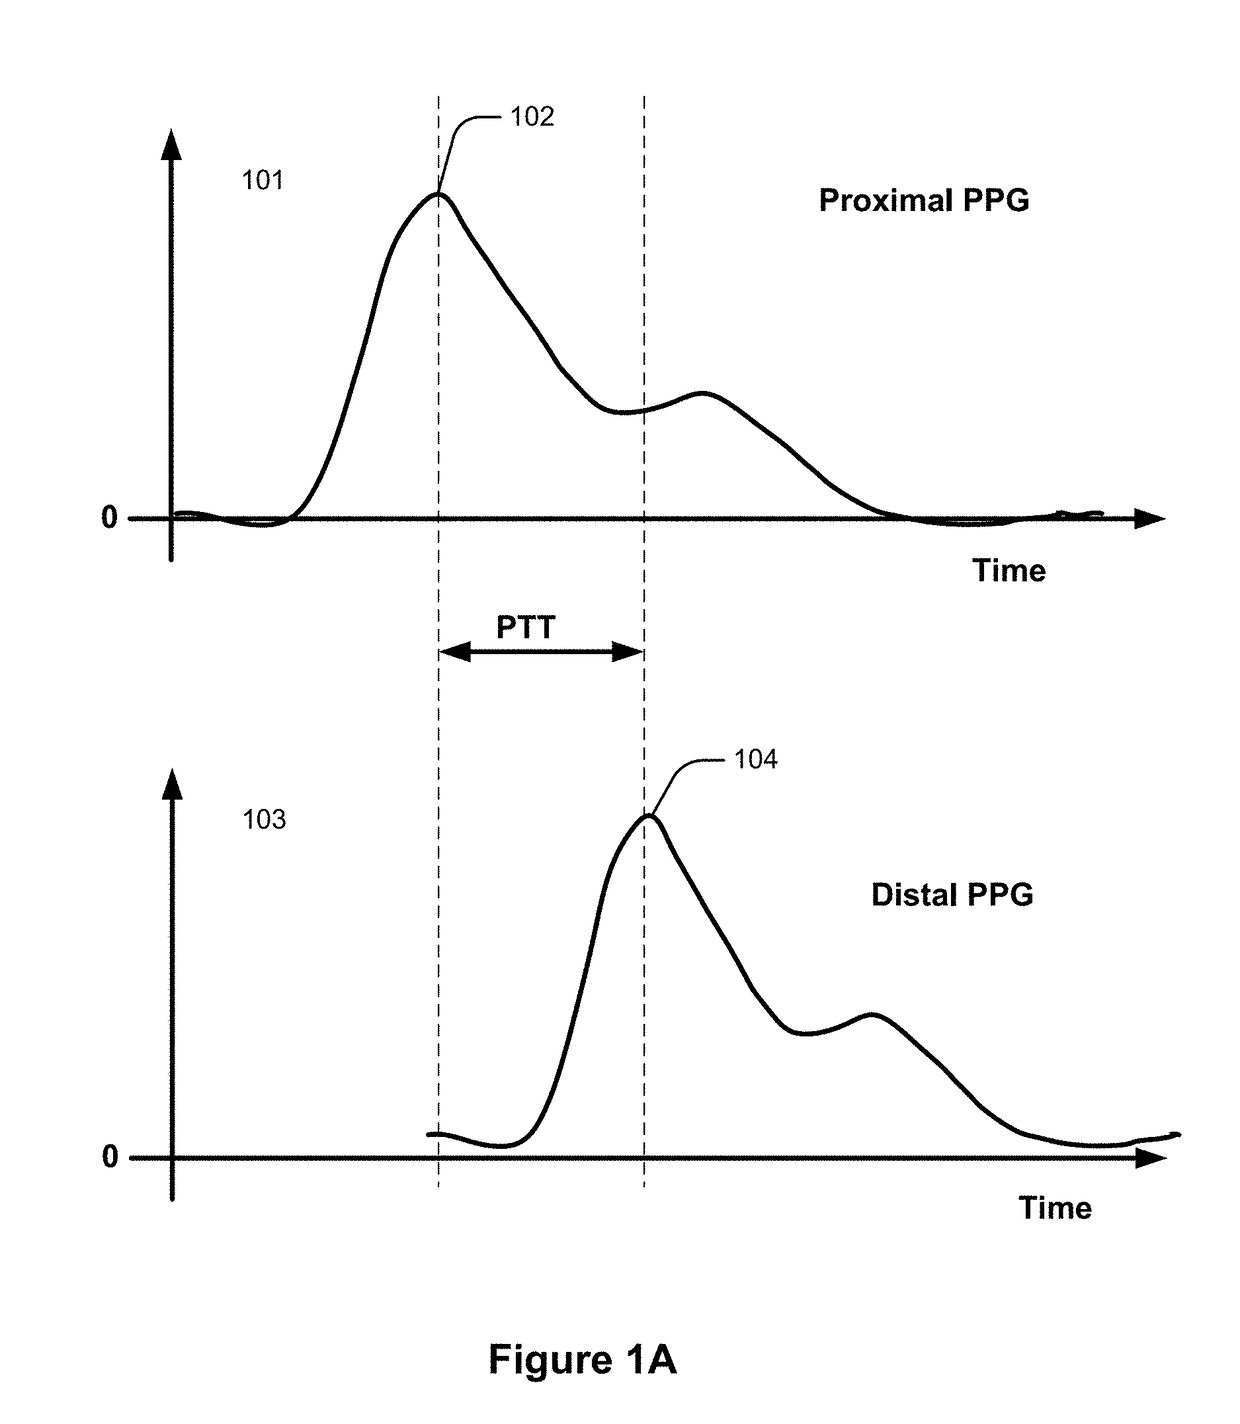 Calibration of pulse-transit-time to blood pressure model using multiple physiological sensors and various methods for blood pressure variation